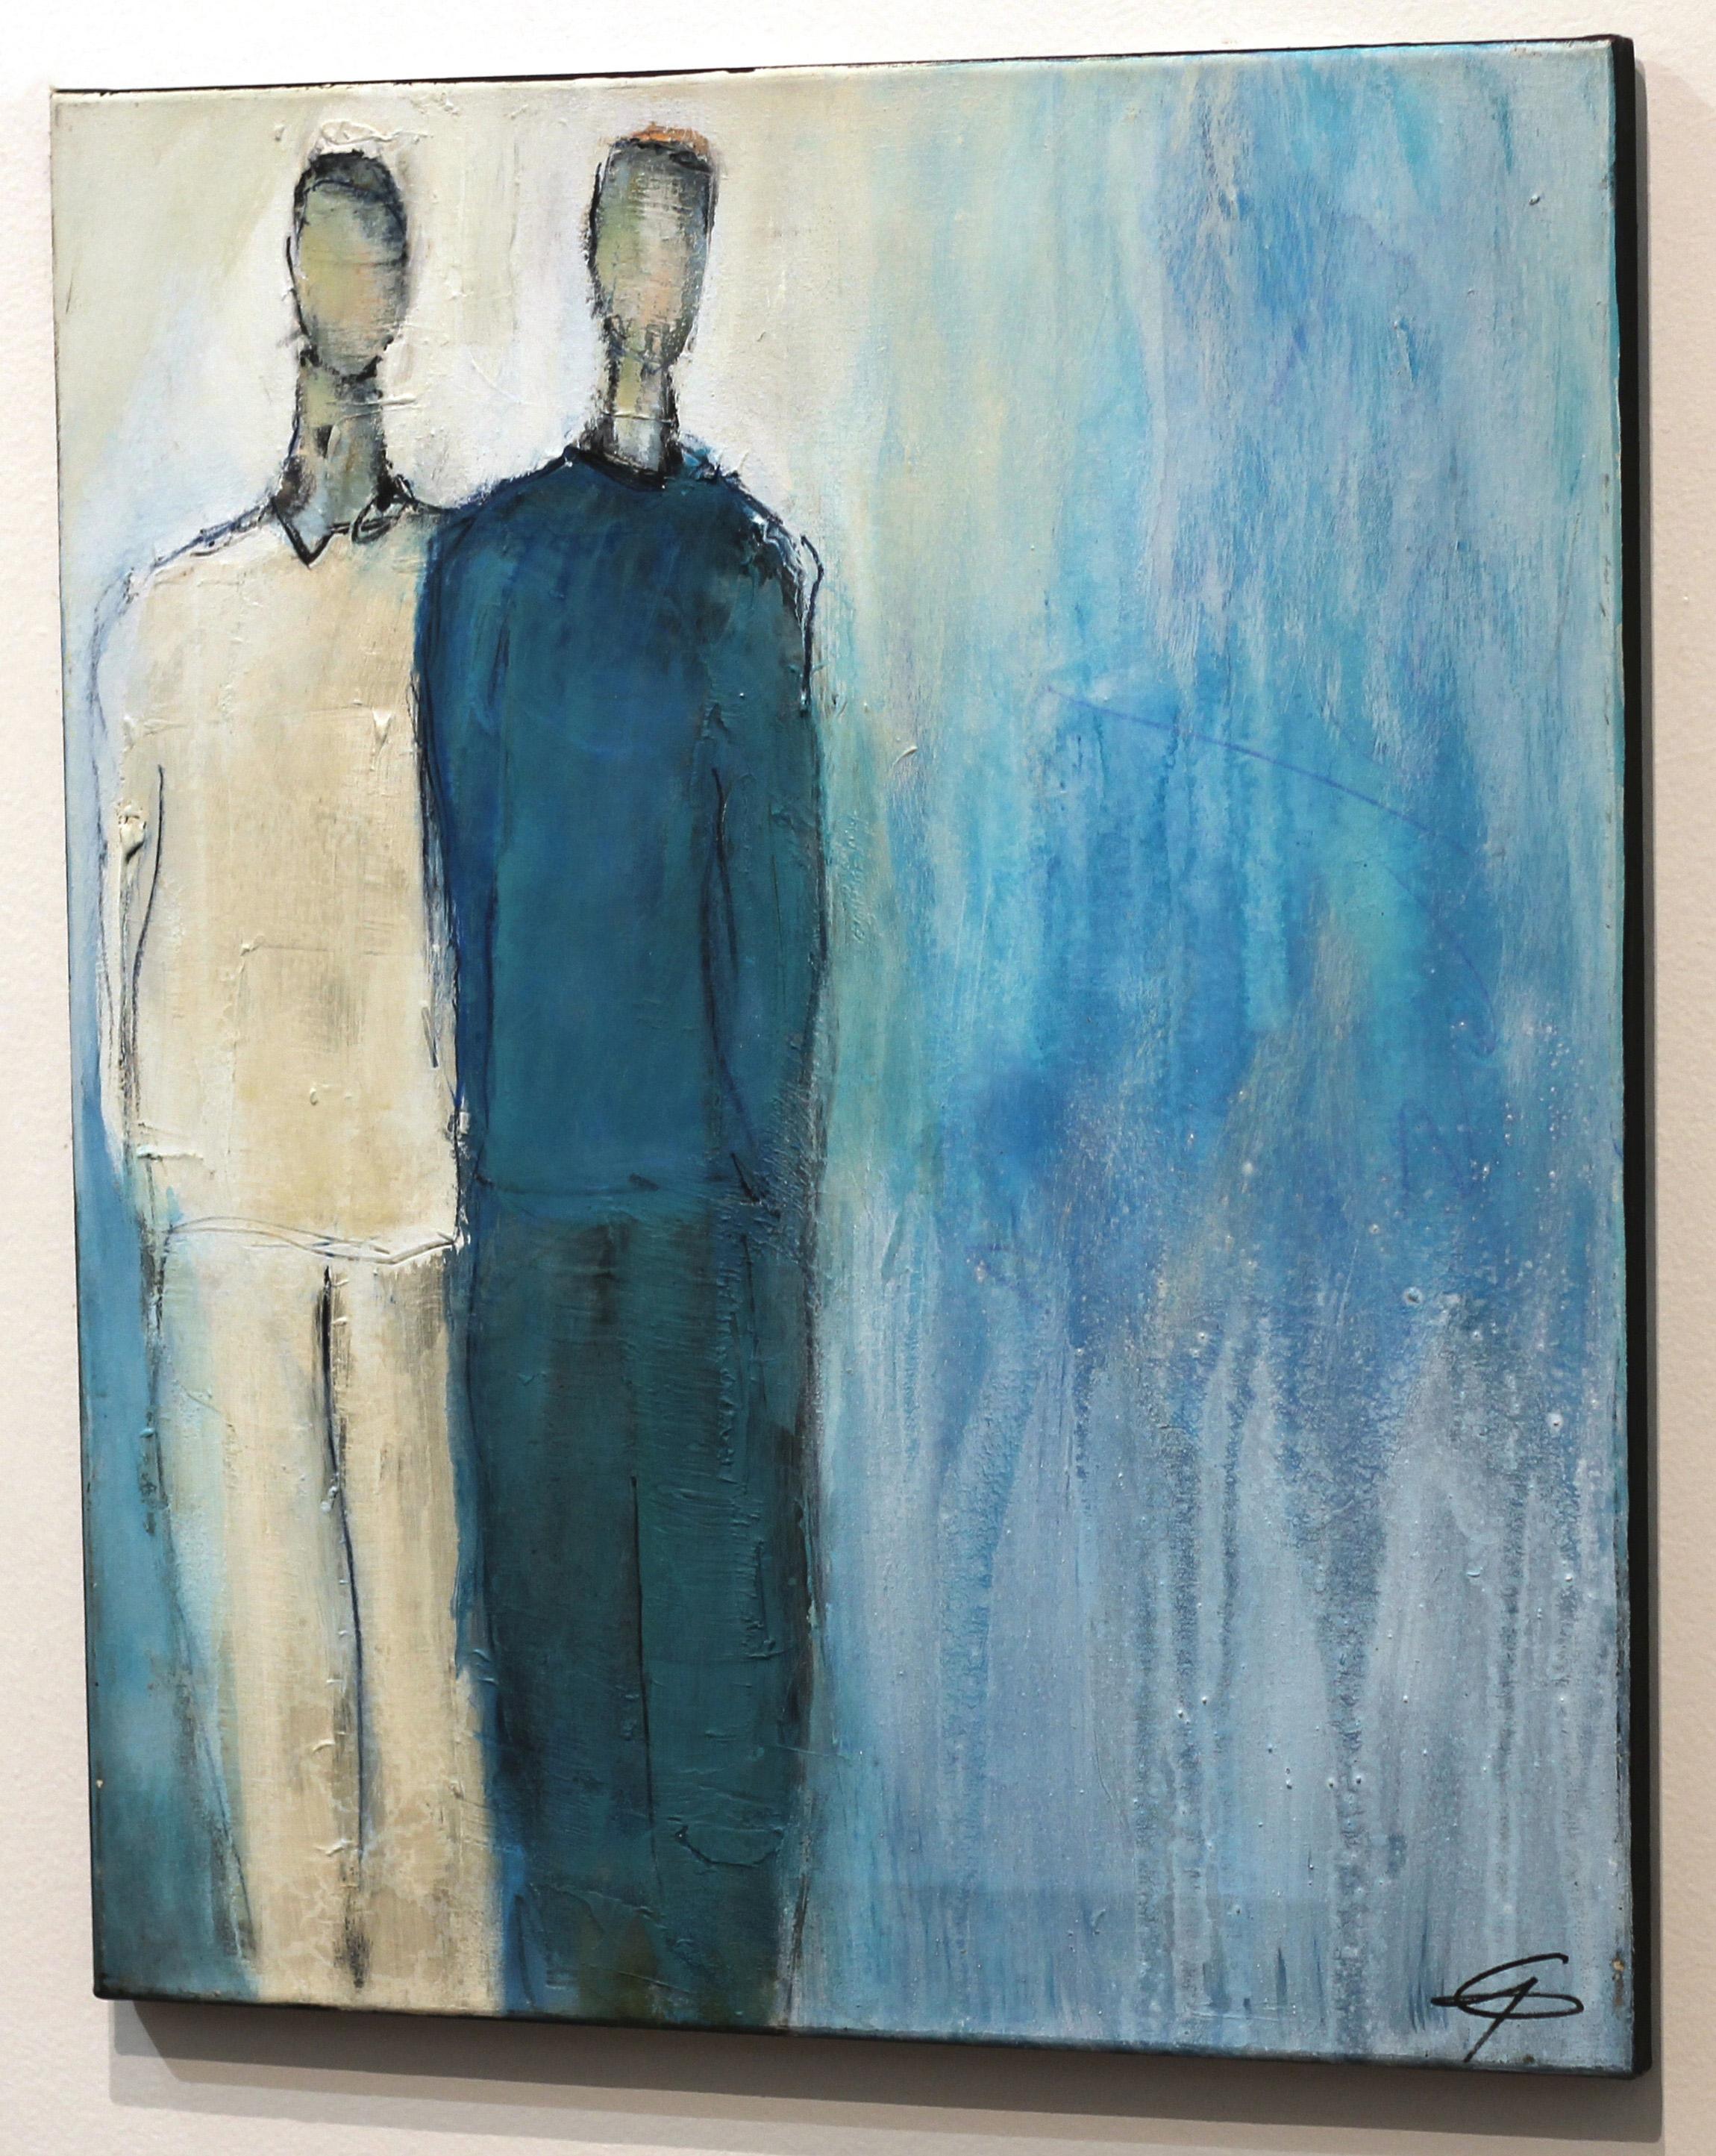 Swiss artist Edith Konrad paints figurative abstract compositions with mixed media on canvas. She layers her expression of her emotional response to the subjects with dynamic textures and subtle patterns in her artworks. The thick layers of paint